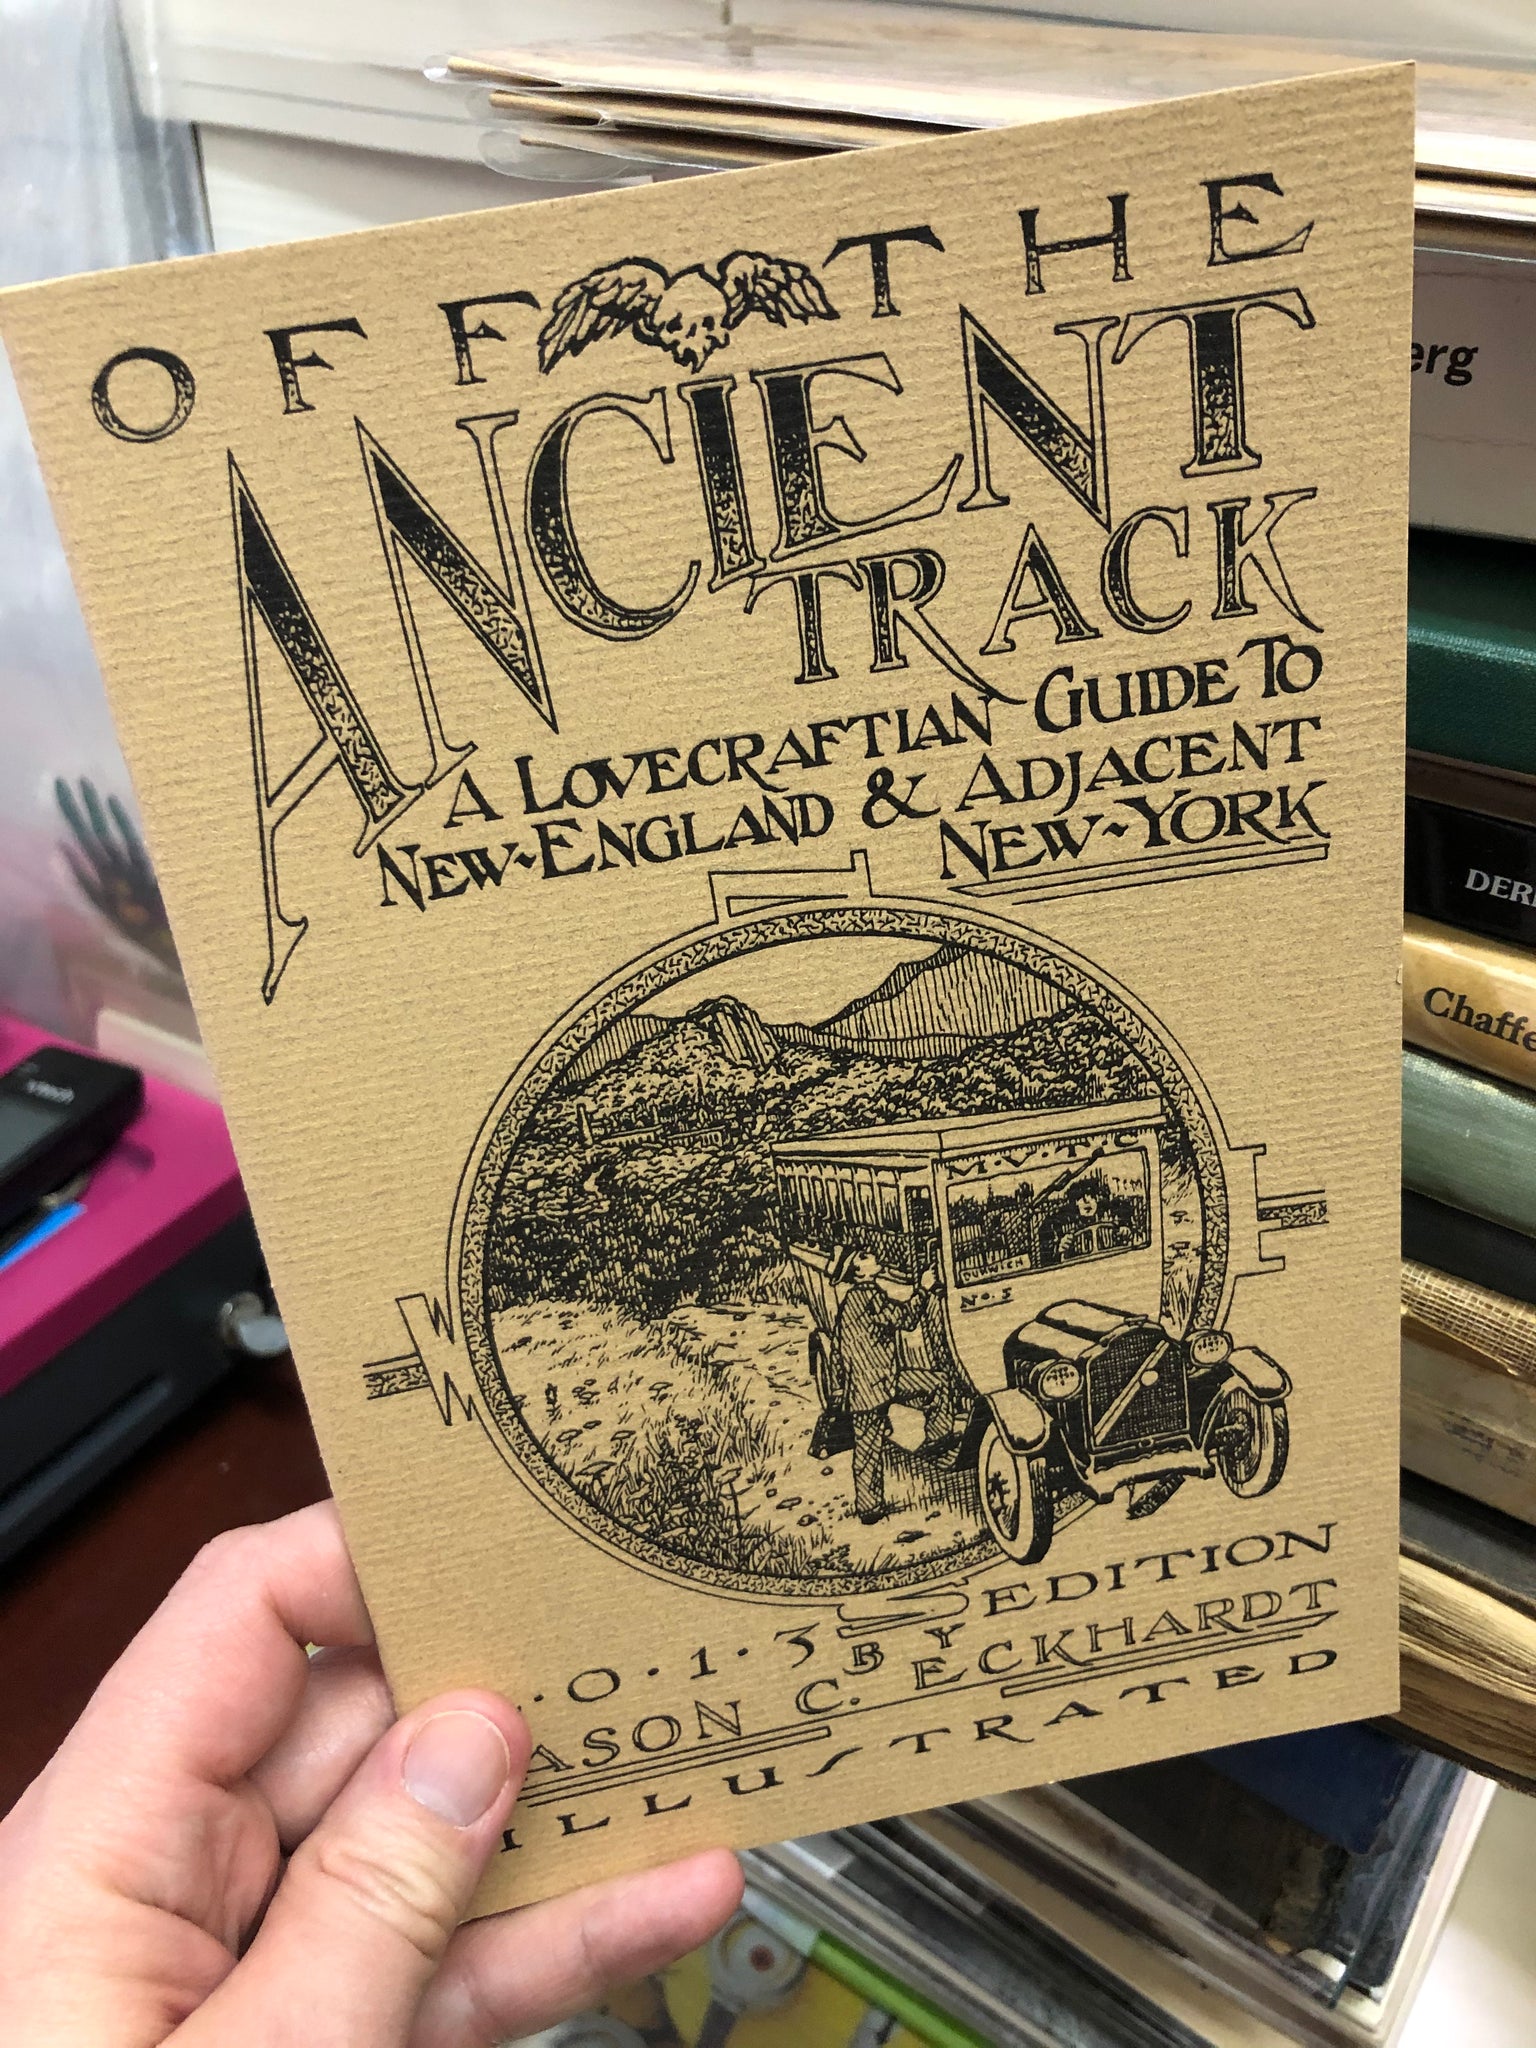 Off the Ancient Track: A Lovecraftian Guide to New England & Adjacent New York by Jason Eckhardt - SIGNED!